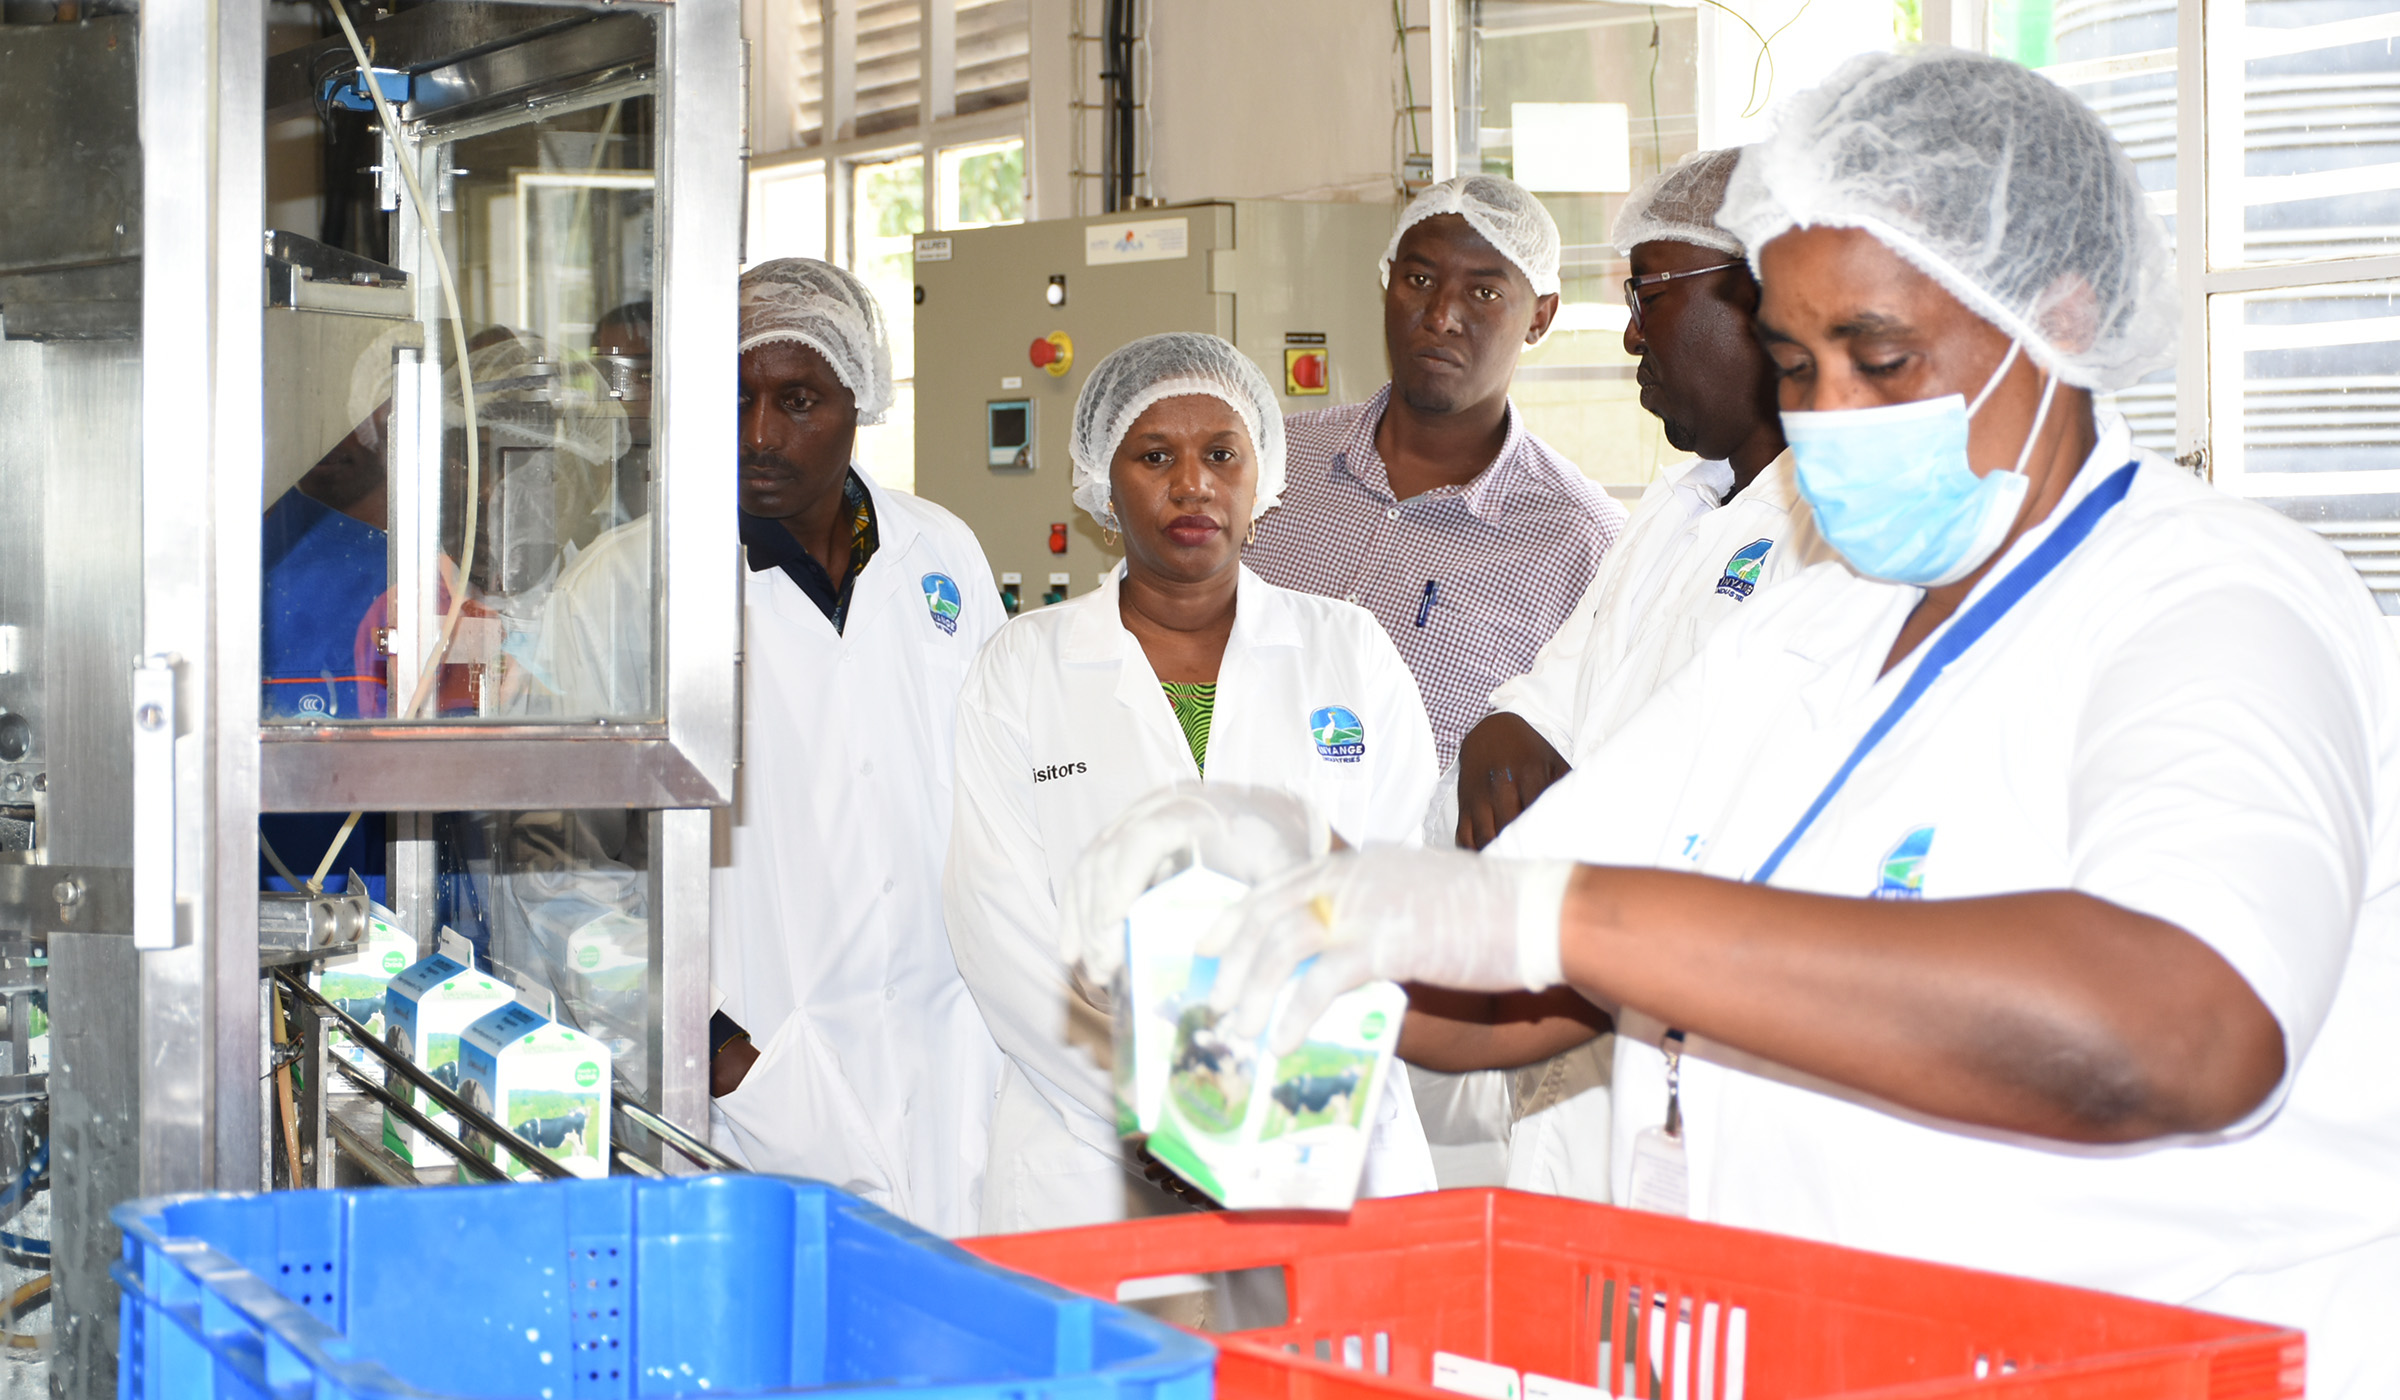 The Minister for Public Service and Labour Fanfan Rwanyindo Kayirangwa (2nd left), Eastern Province Governor Fred Mufulukye (left) and other officials are taken through the process of milk production at Inyange Industries plant in Nyagatare District yesterday. At the national level, Labour Day was marked under the theme: u201cQuality Work, A Catalyst for Sustainable Developmentu201d. Jean de Dieu Nsabimana.